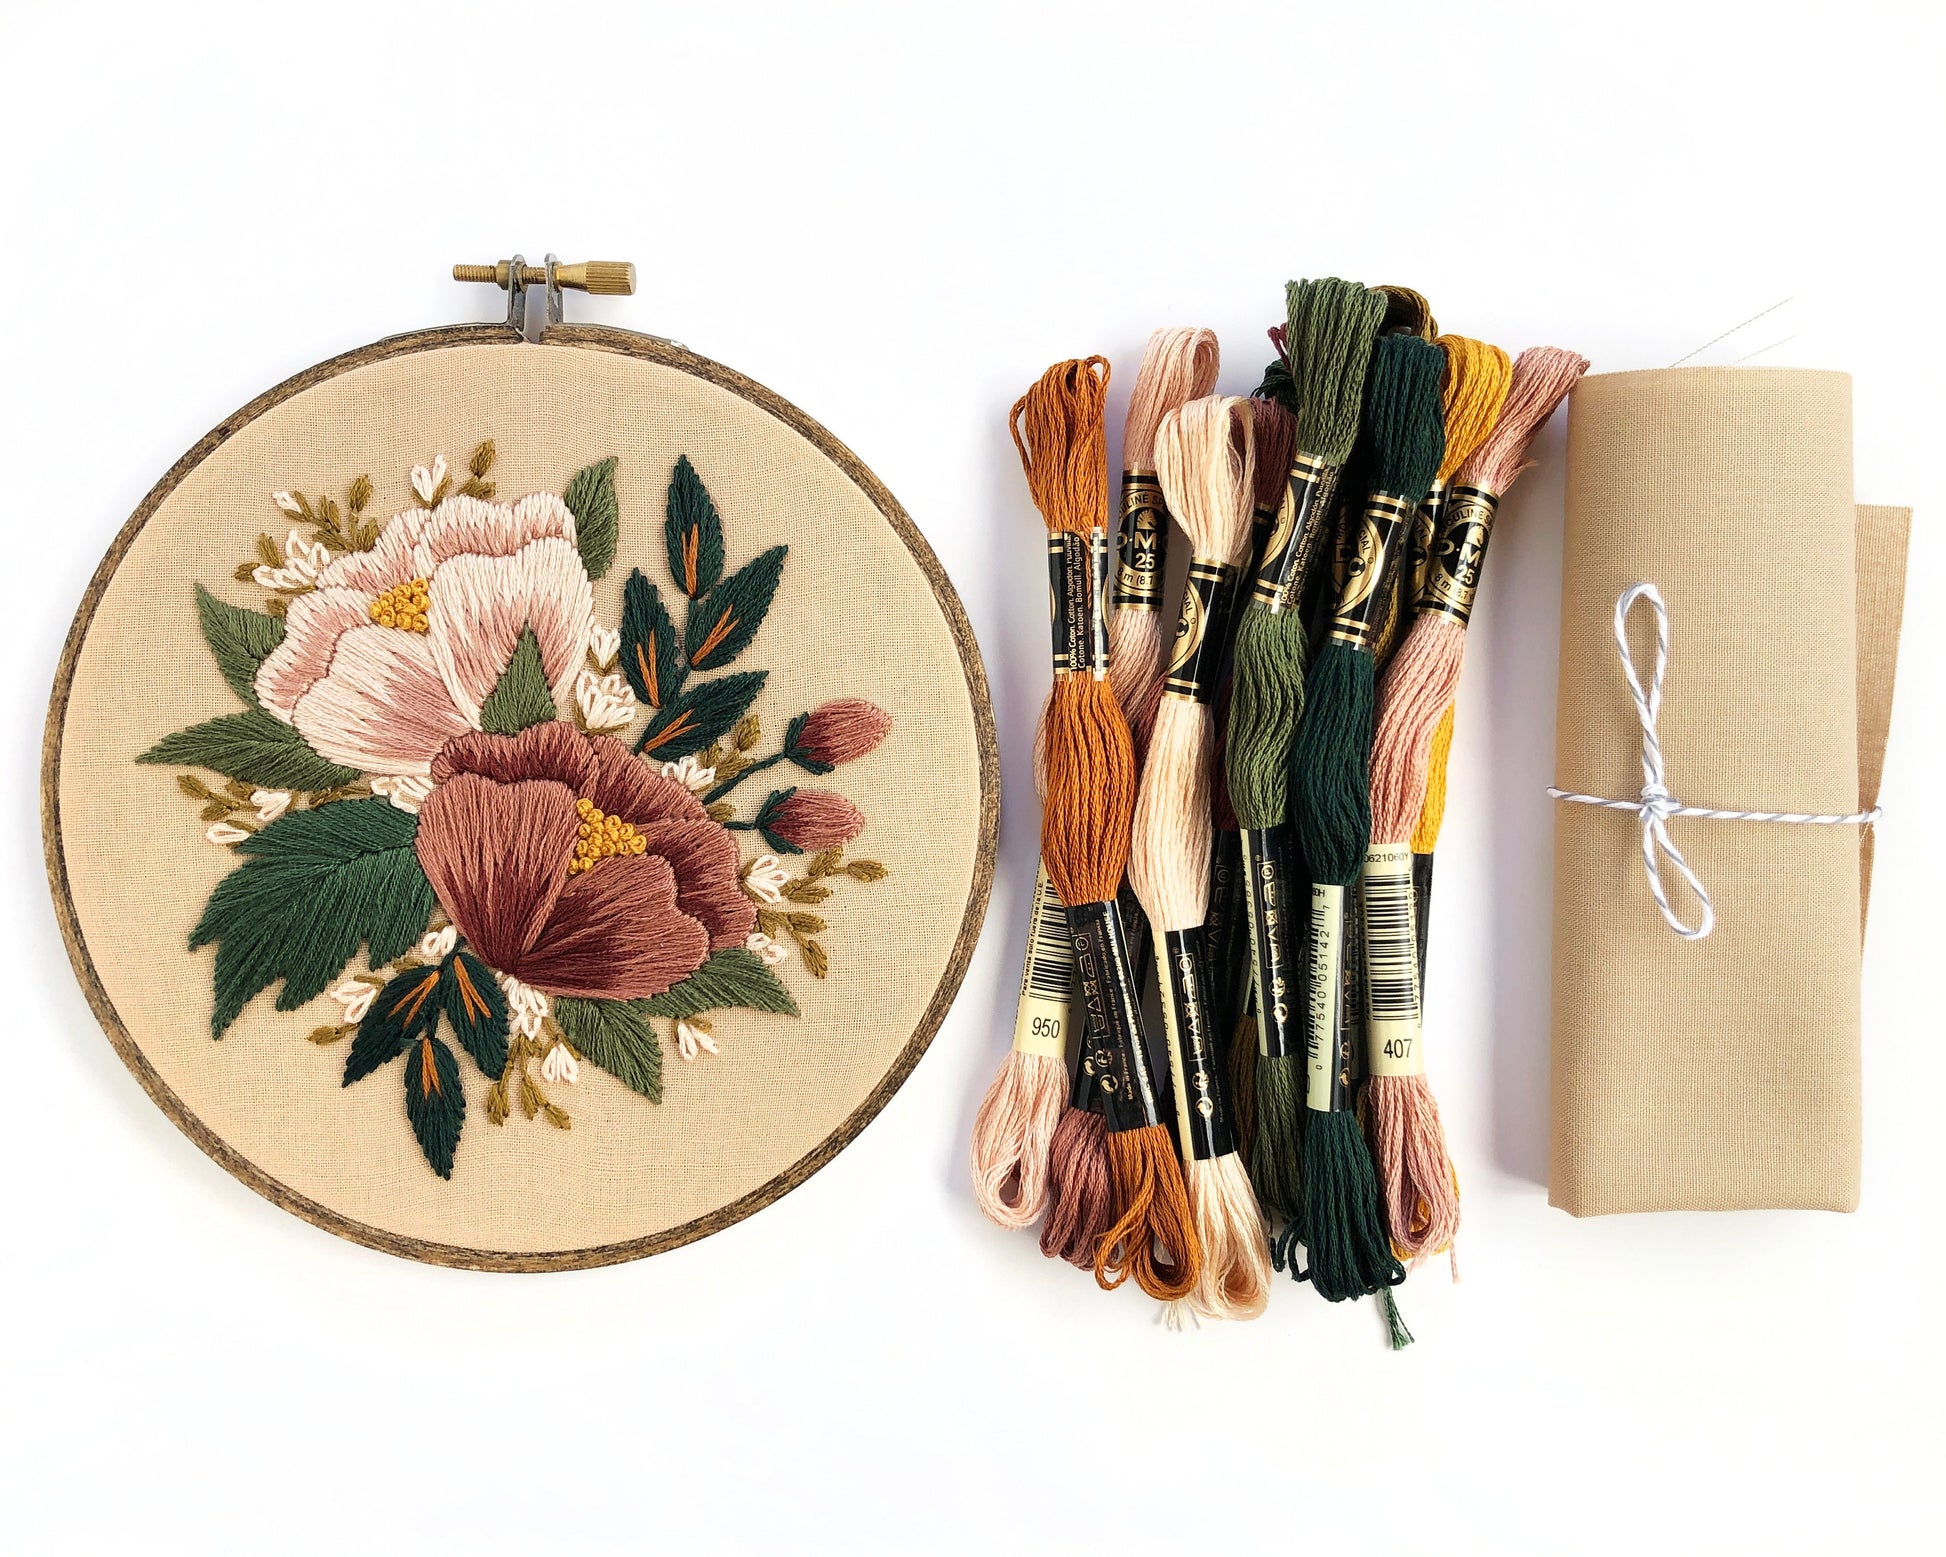 Hand embroidery Kit, Blush Florals Embroidery Kit, DIY embroidery, DIY home decor, embroidery kit, flower embroidery, floral embroidery